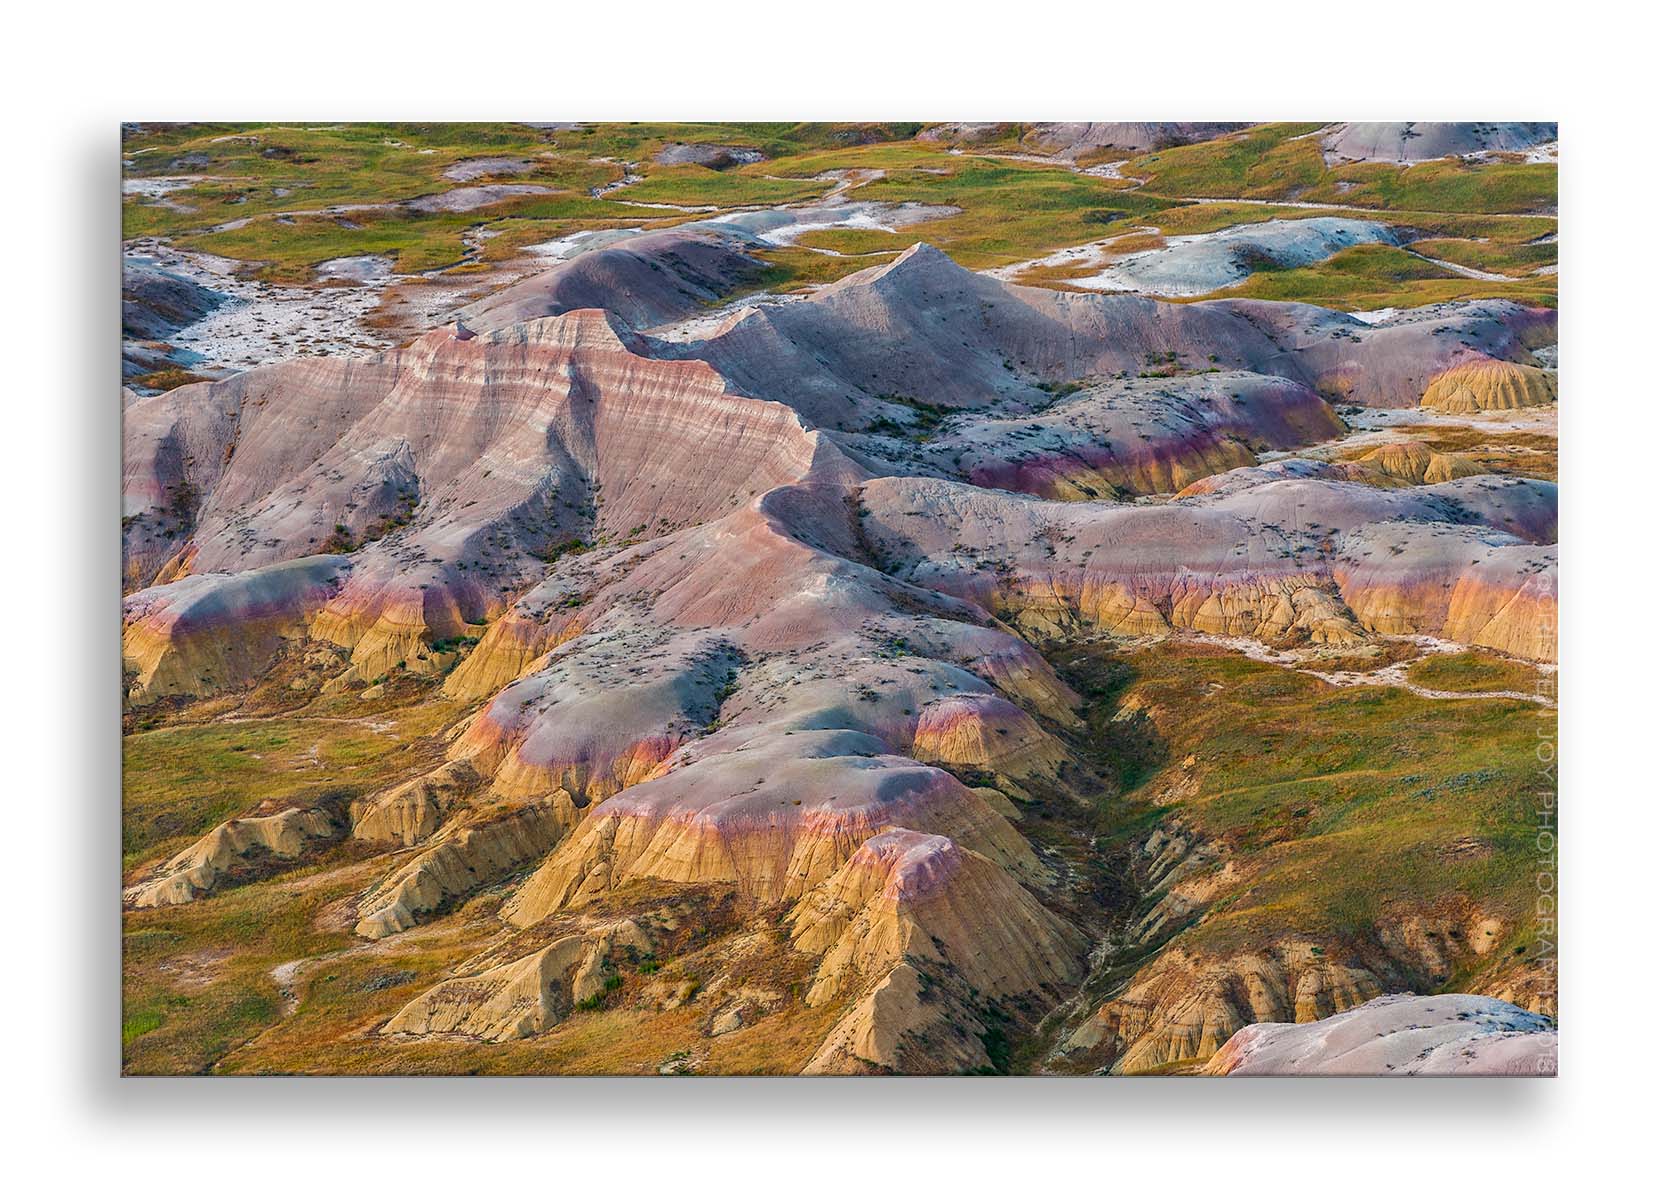 Soaring Over the Badlands – As Viewed from a Piper Cub [Part 2]